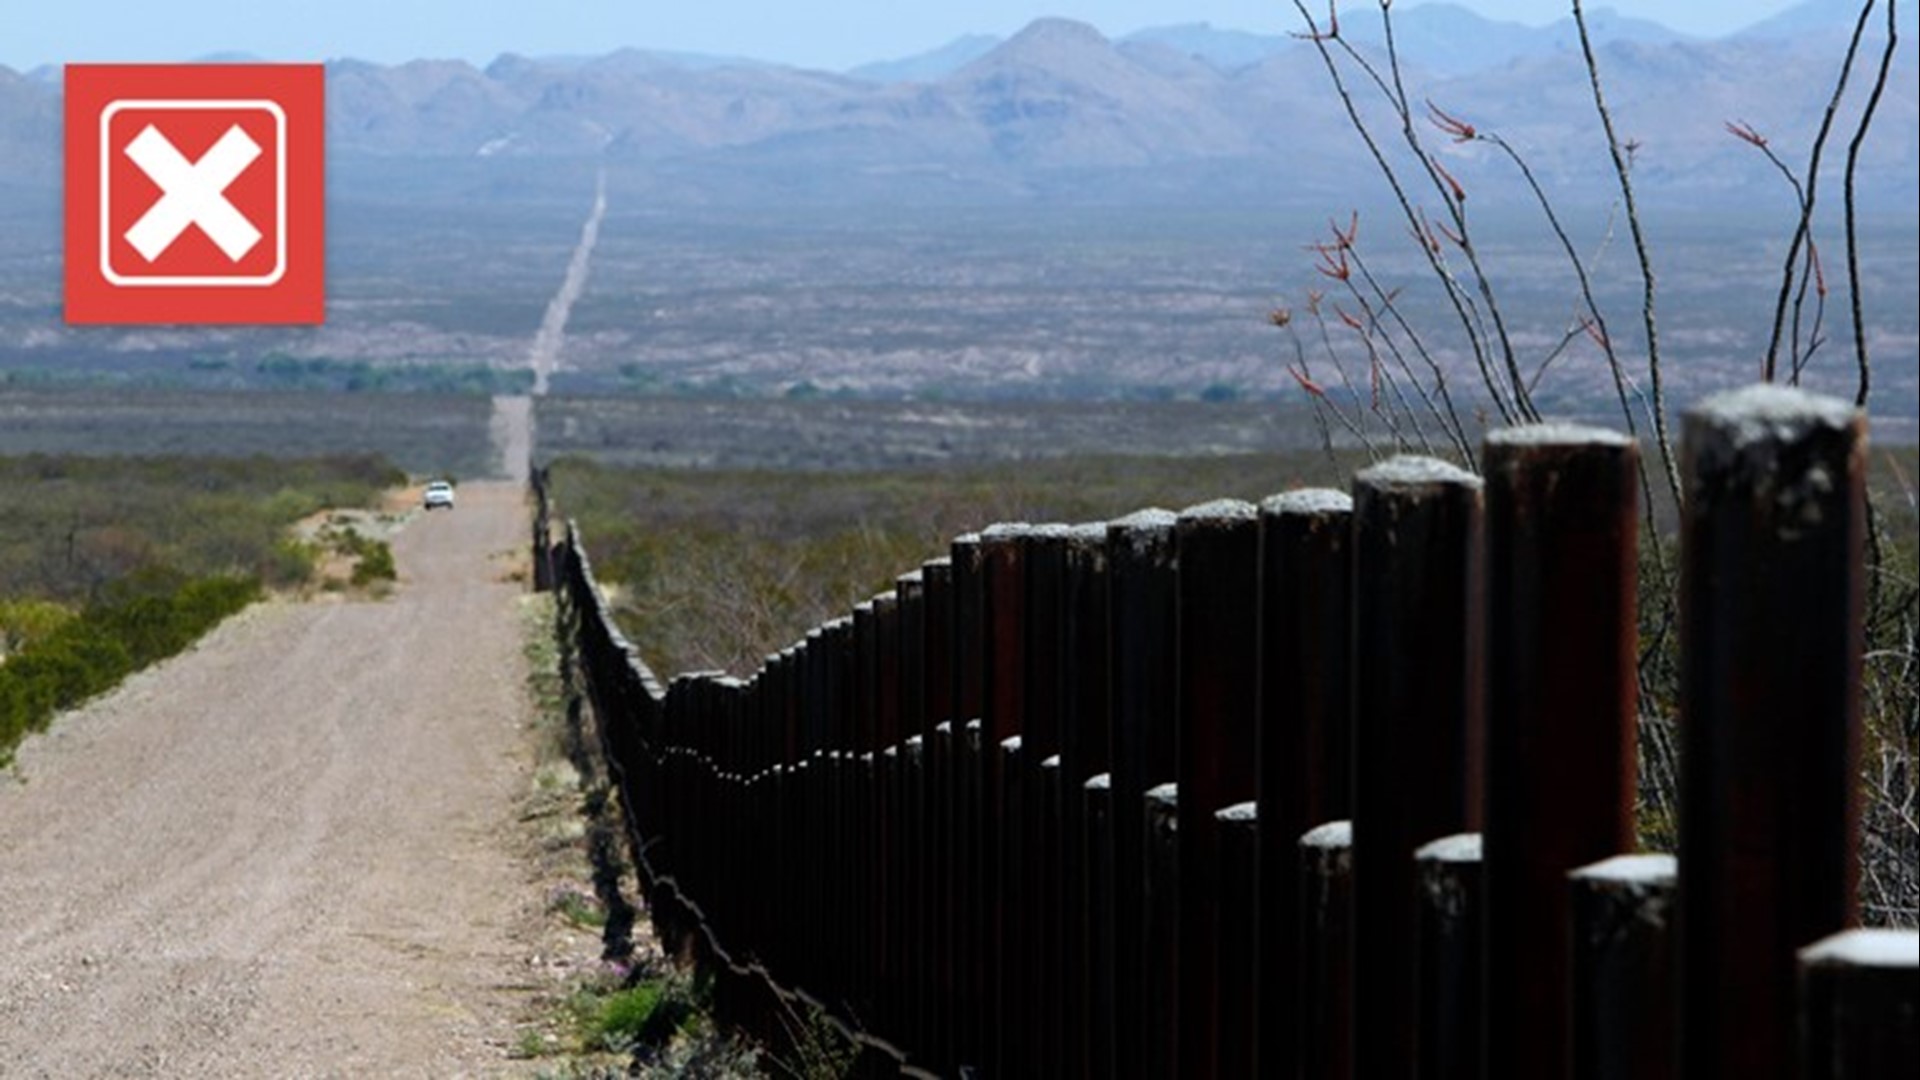 Data of migrant deaths at the U.S. southern border don’t show a significant increase during Biden’s first six months in office in comparison to Trump’s term.